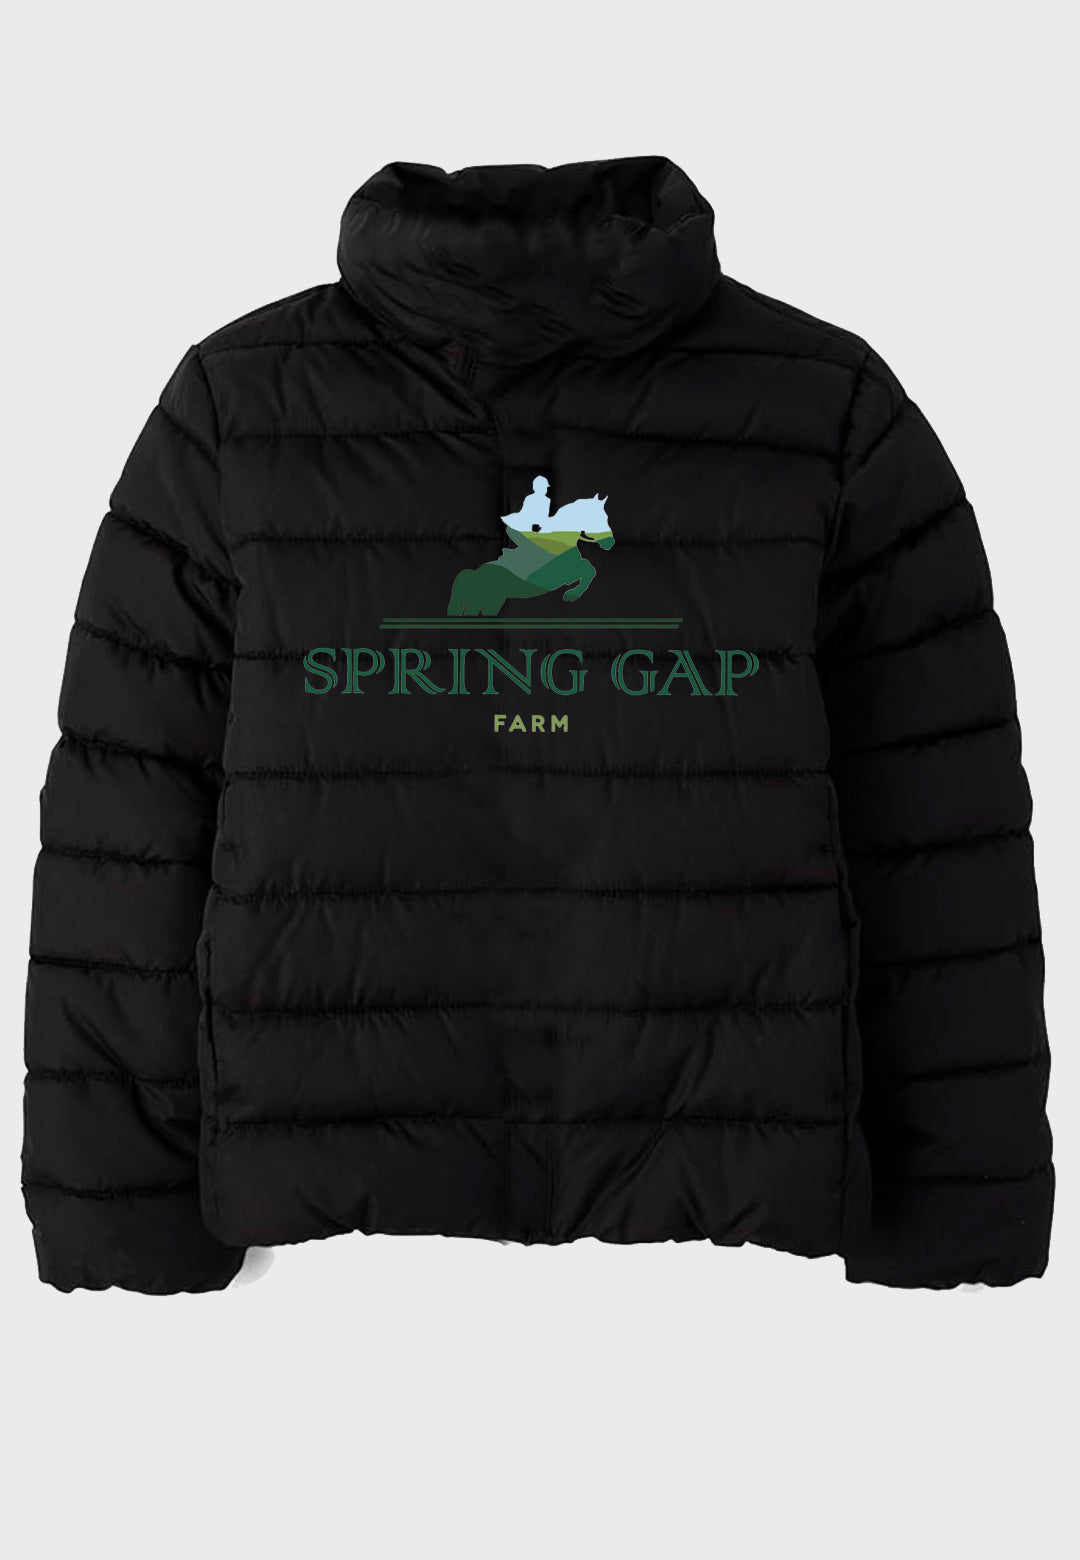 Spring Gap Farm The Children's Place Youth Medium Weight Puffer Jacket